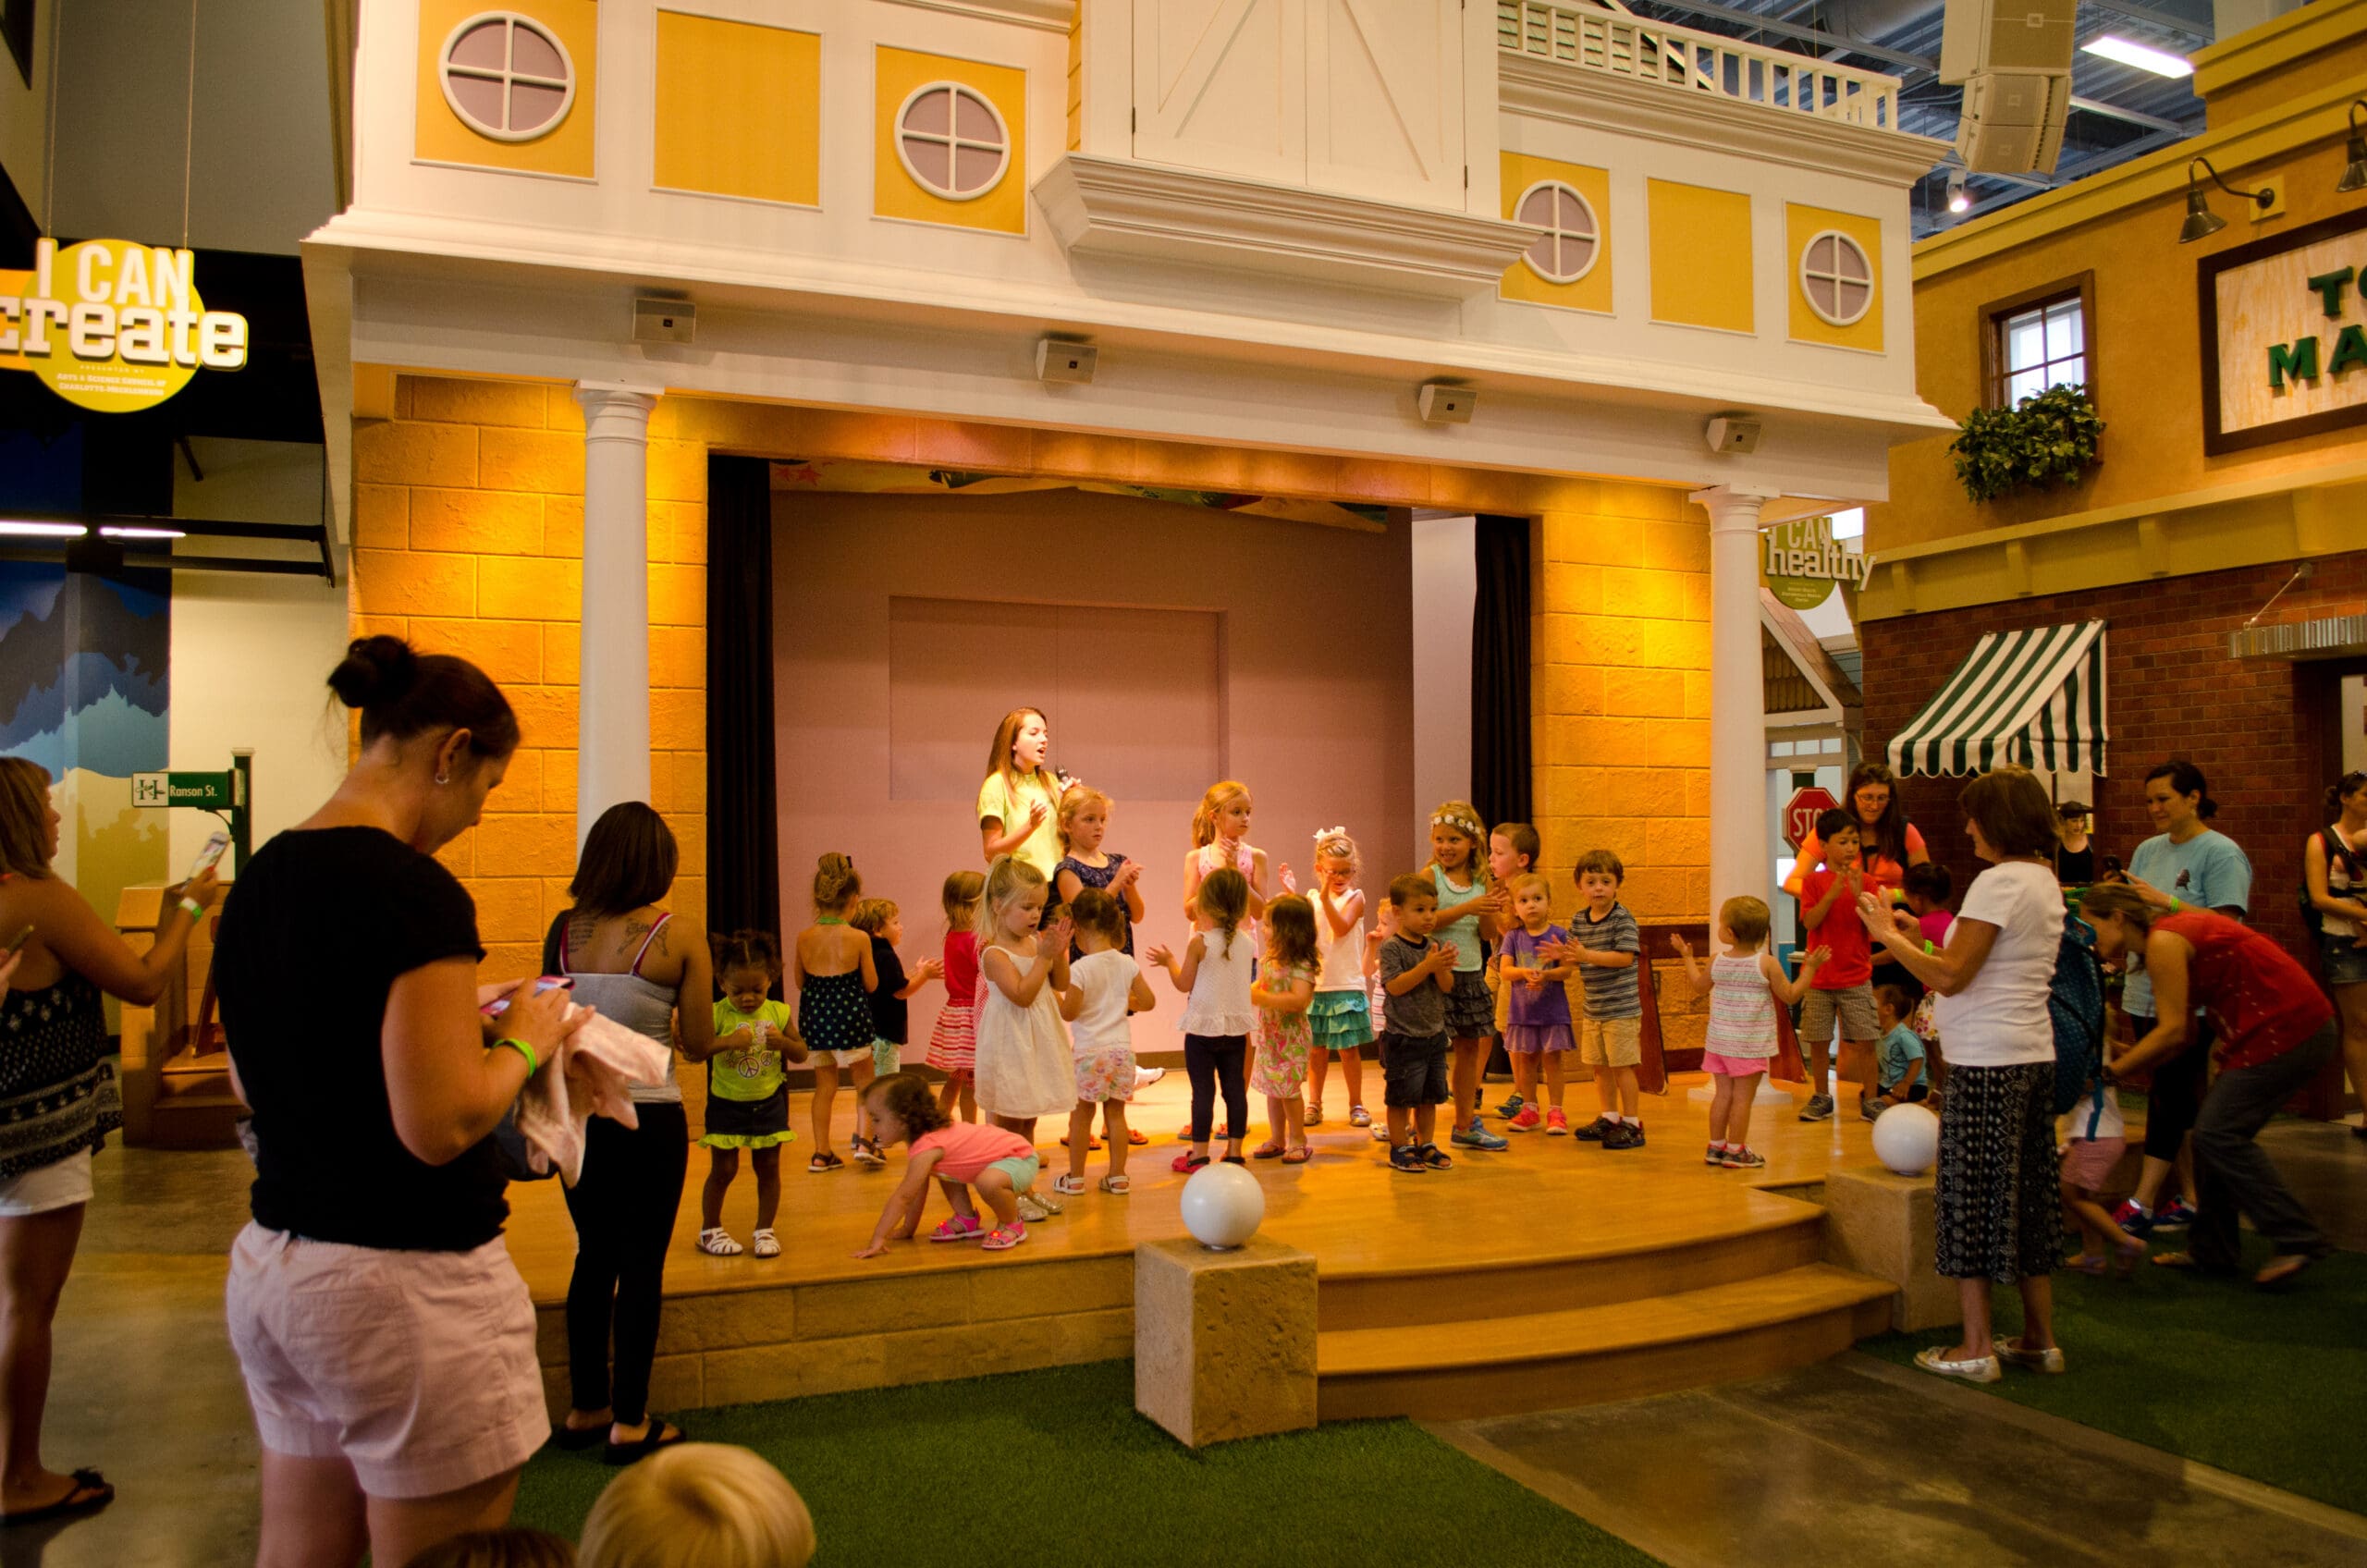 Children dancing at the Town Hall Stage in Discovery Place Kids Huntersville. Enjoy learning and activities when we celebrate Juneteenth at Discovery Place Kids.